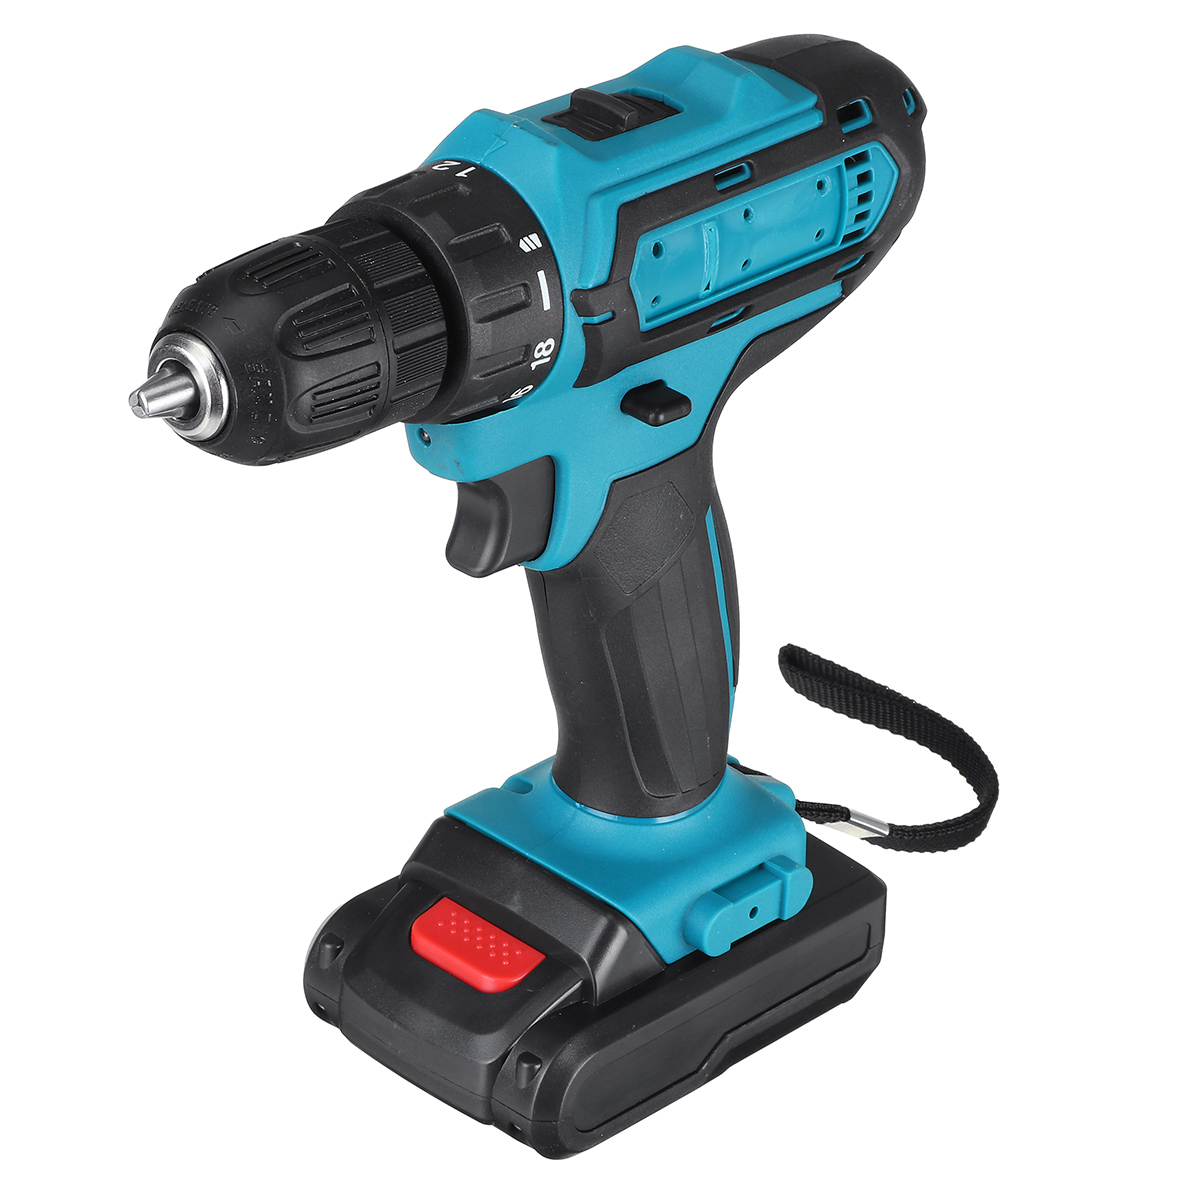 2000rpm-38Nm-21V-Lithium-Electric-Impact-Hammer-Drill-Wood-Drilling-Screwdrivers-with-Battery-1943477-16